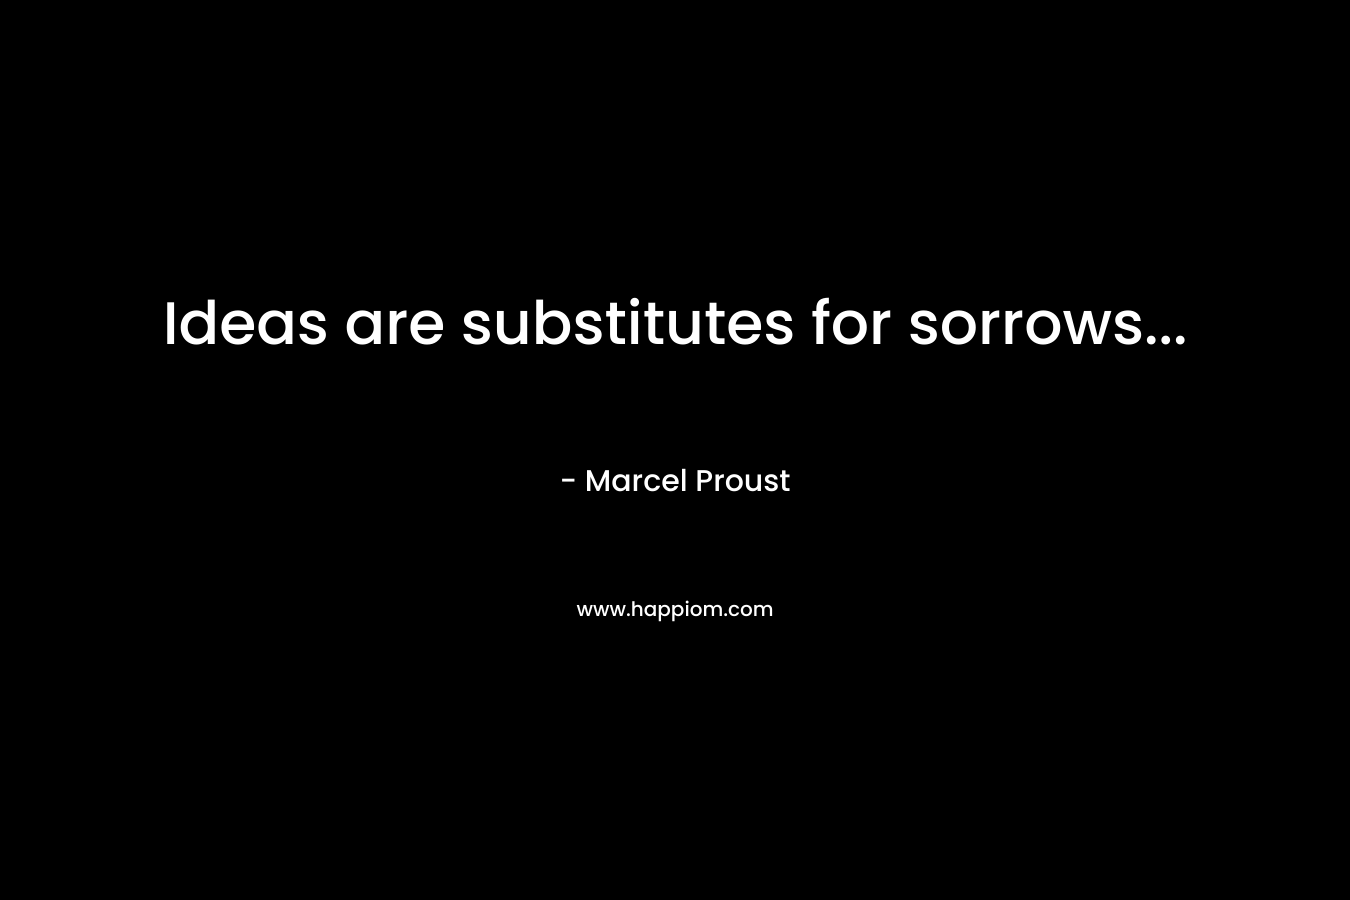 Ideas are substitutes for sorrows...